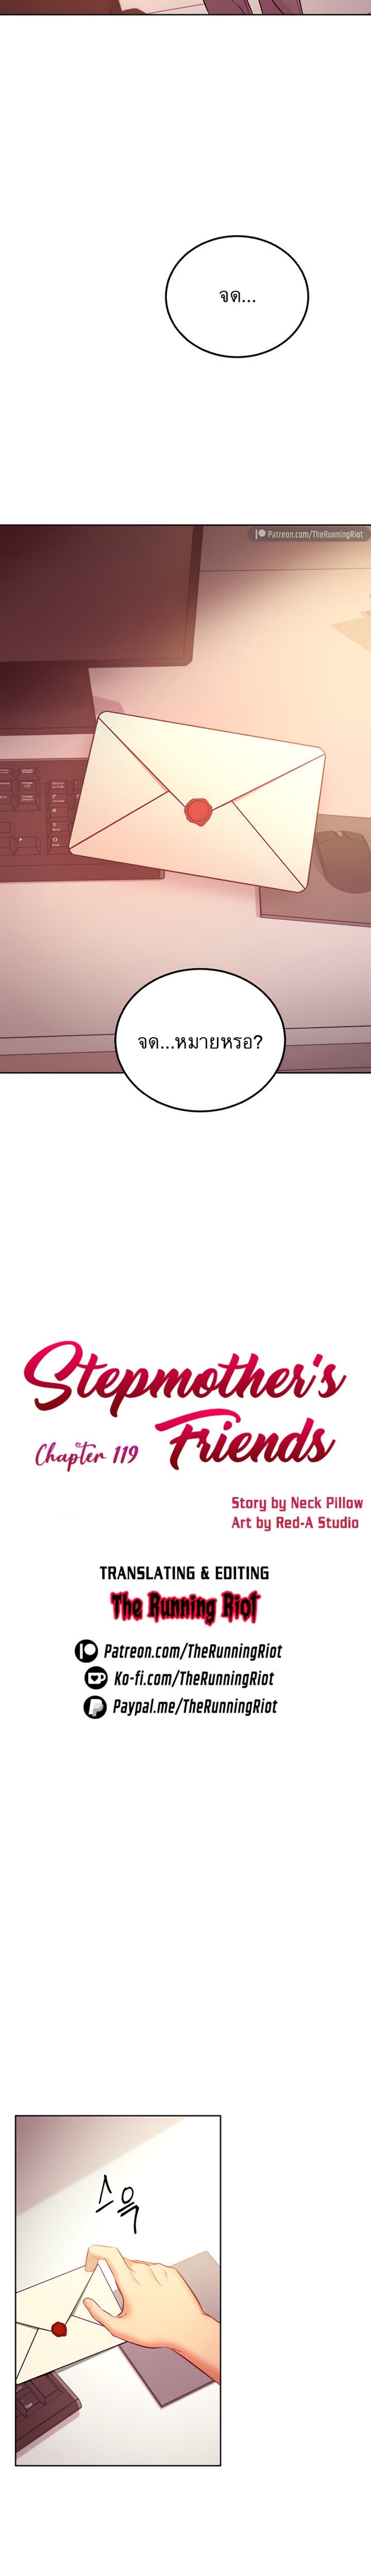 Stepmother’s Friends119 02